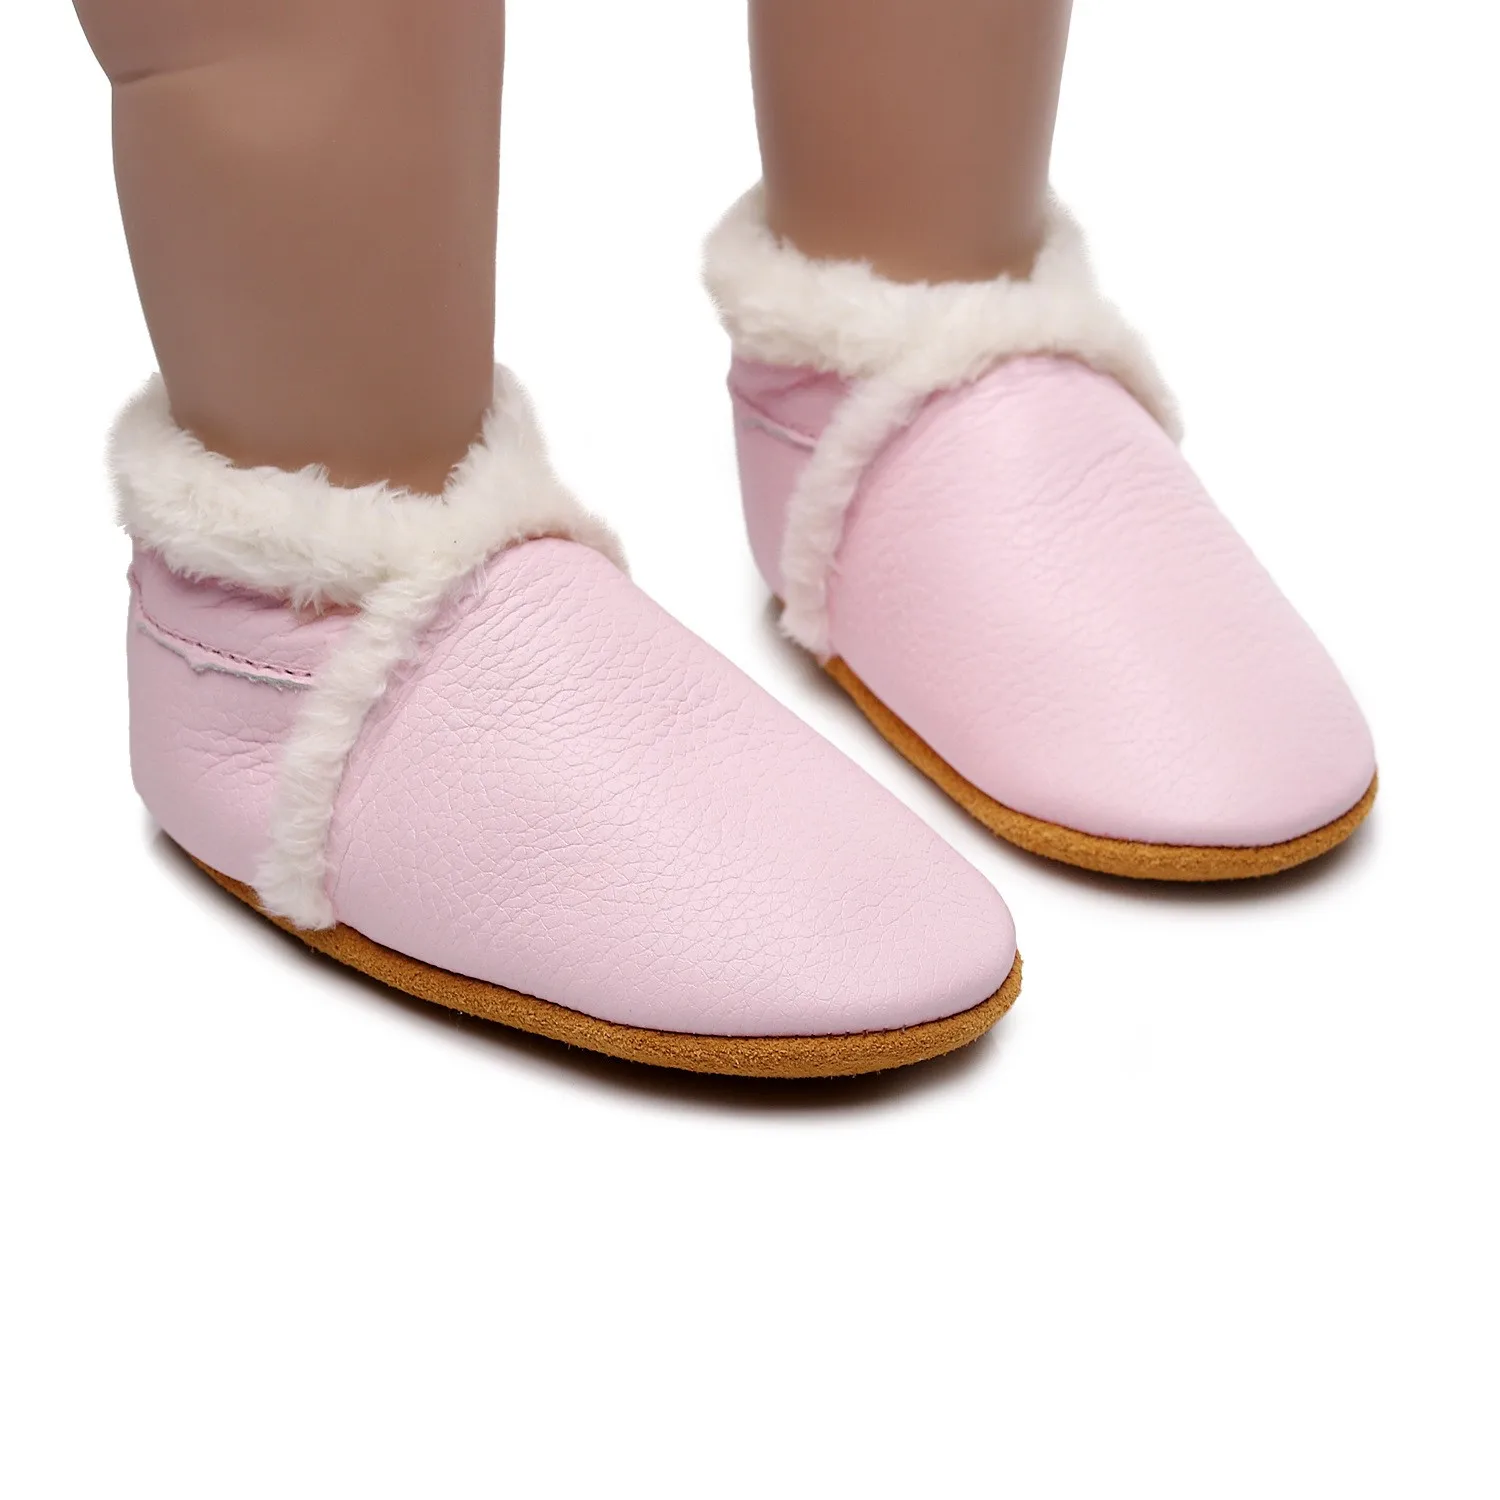 winter baby shoes 39